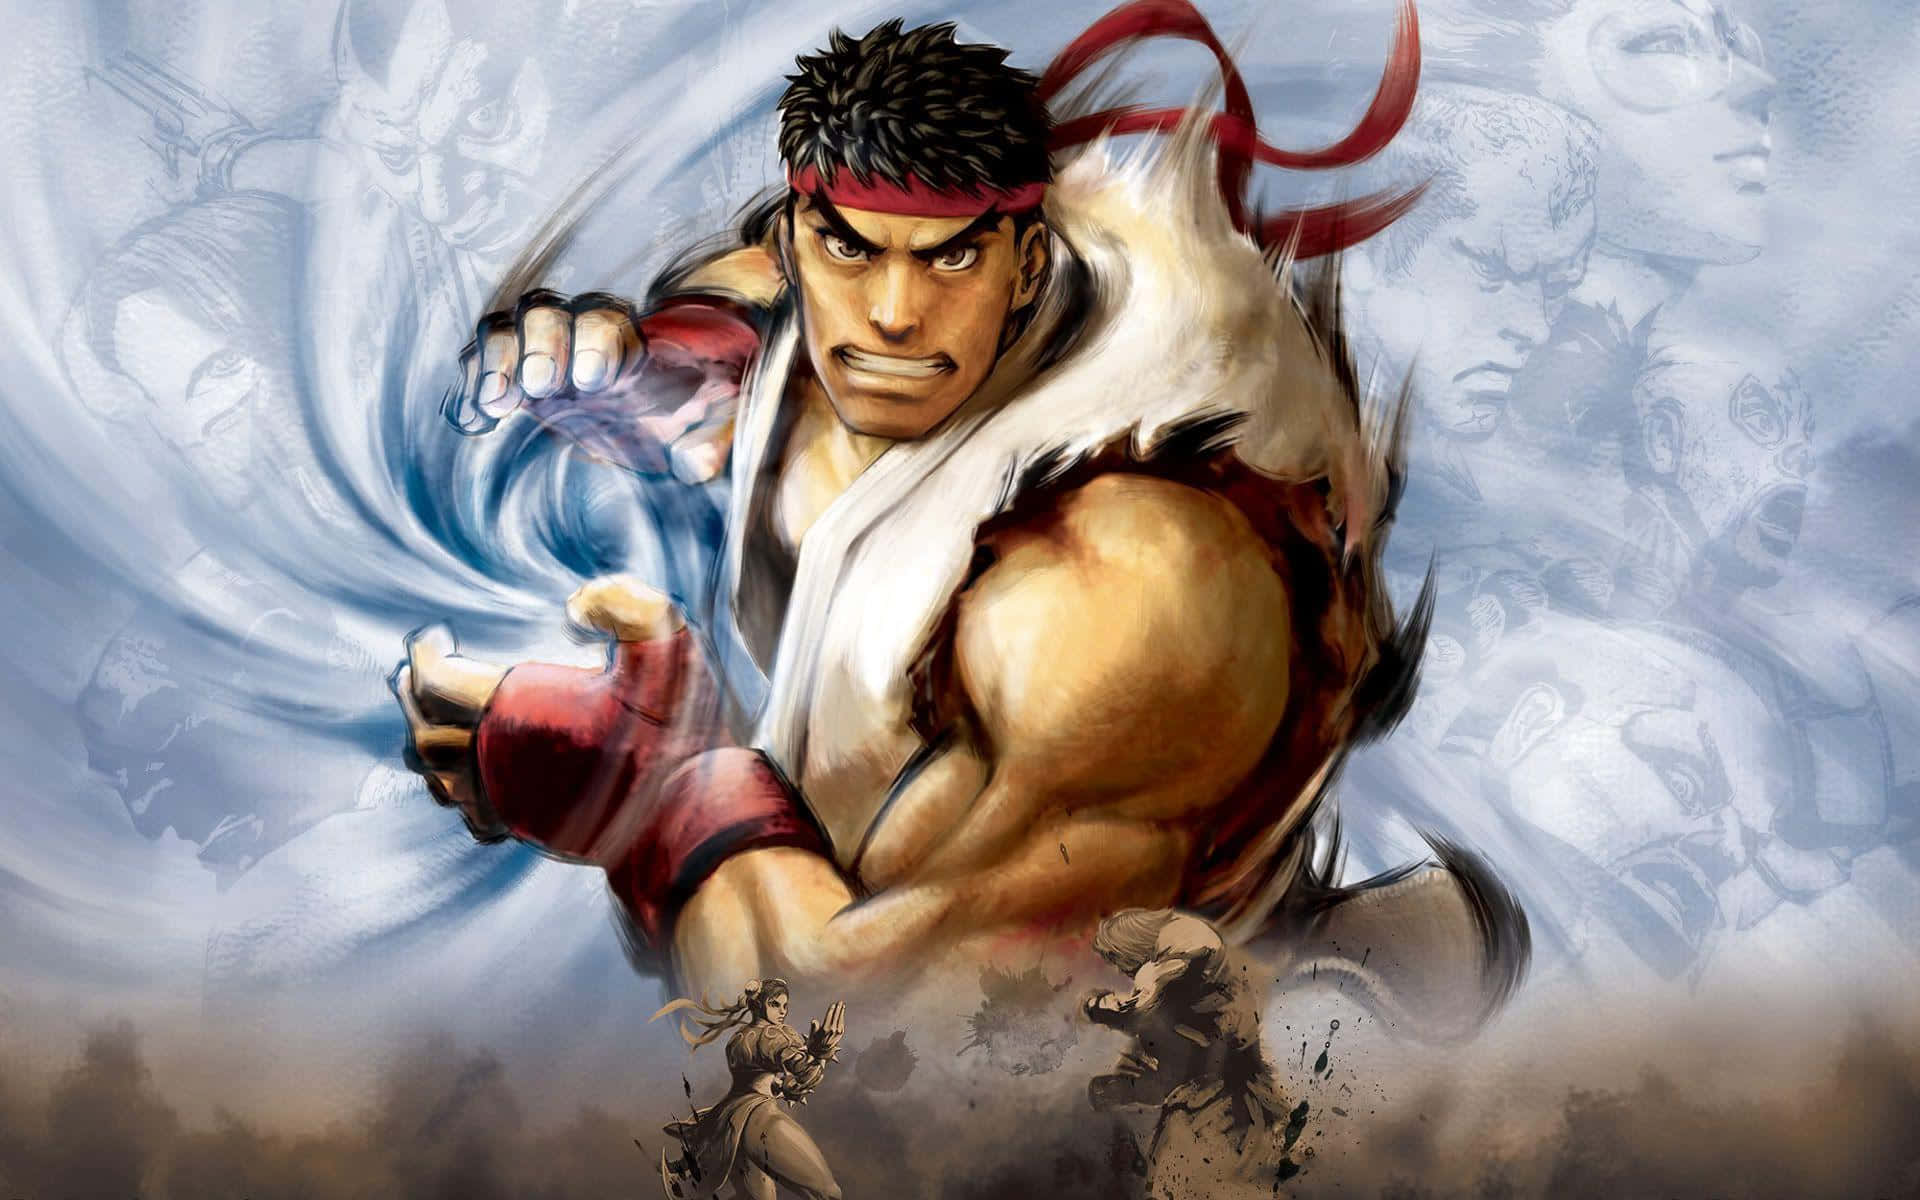 Epic Street Fighter Characters in Action Wallpaper